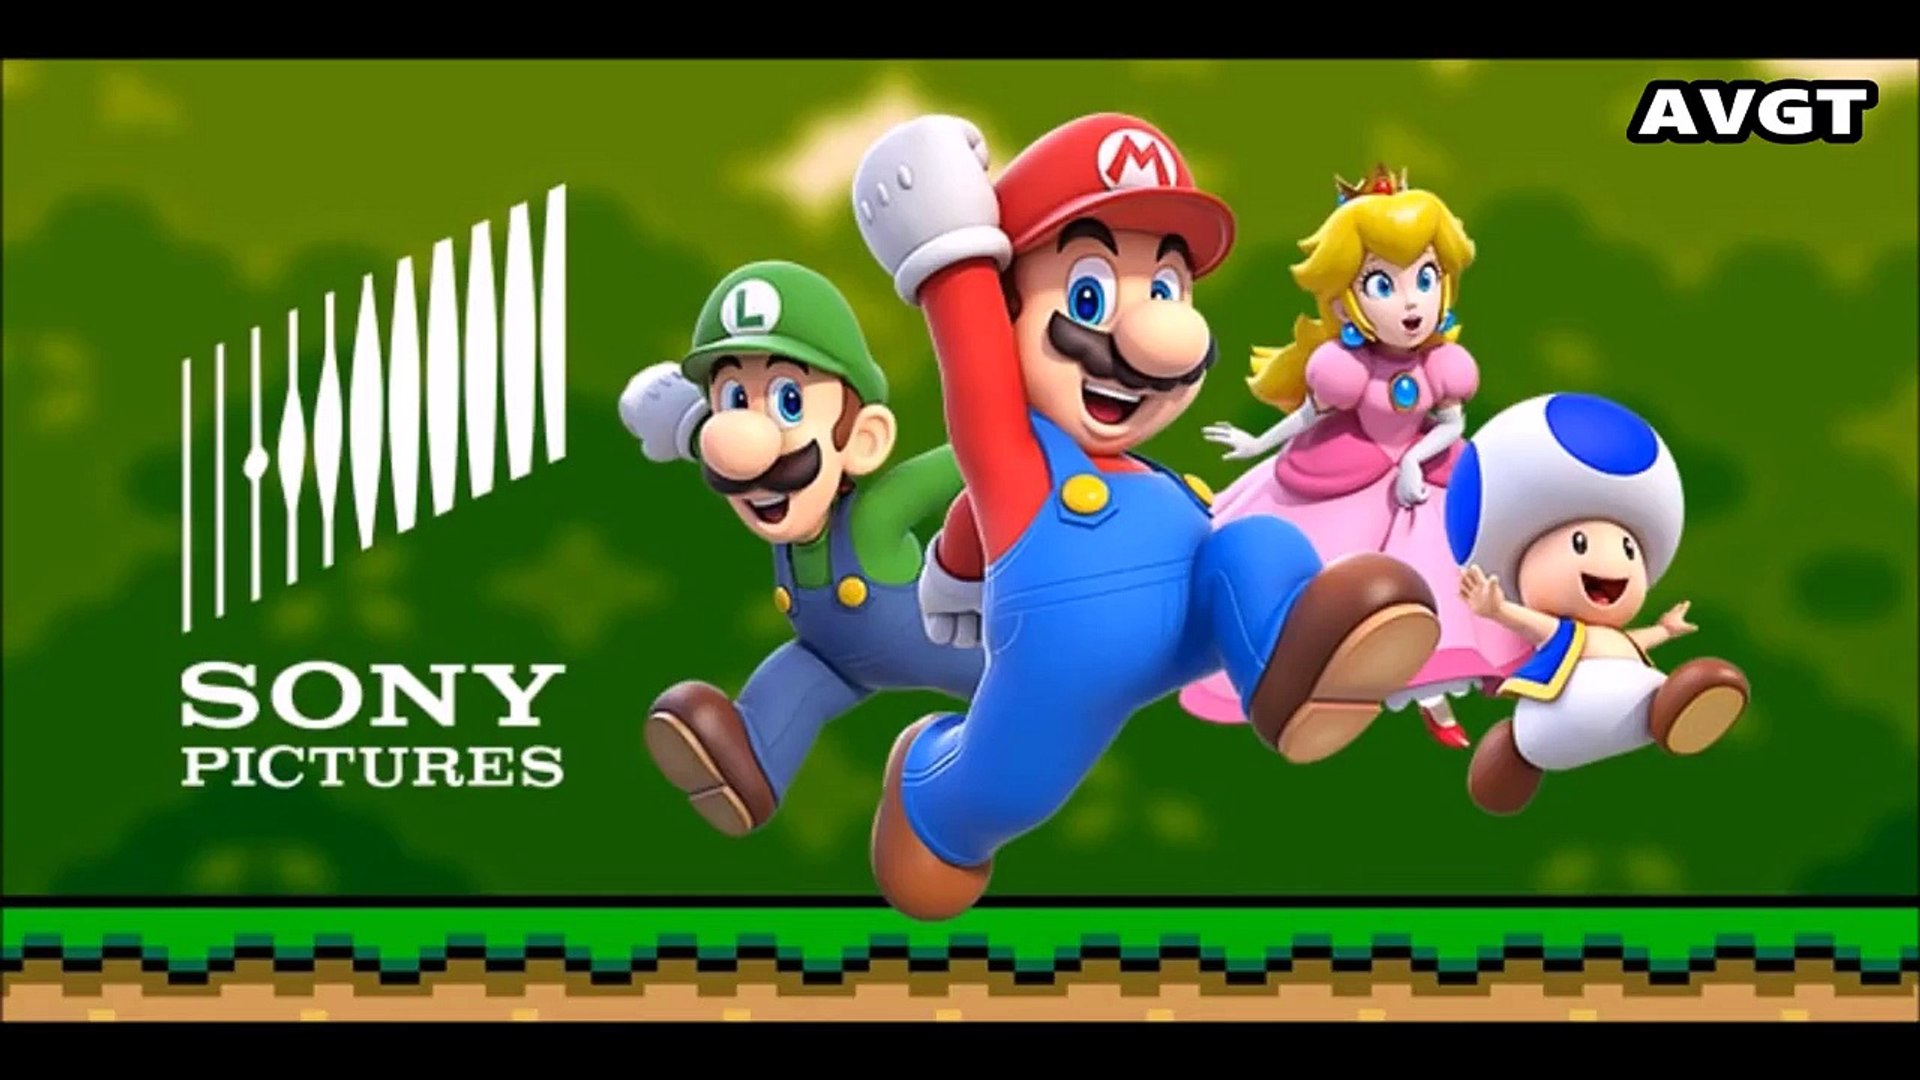 A Sony Mario Animated Film clip from AVGT 12/15/2014 - video Dailymotion